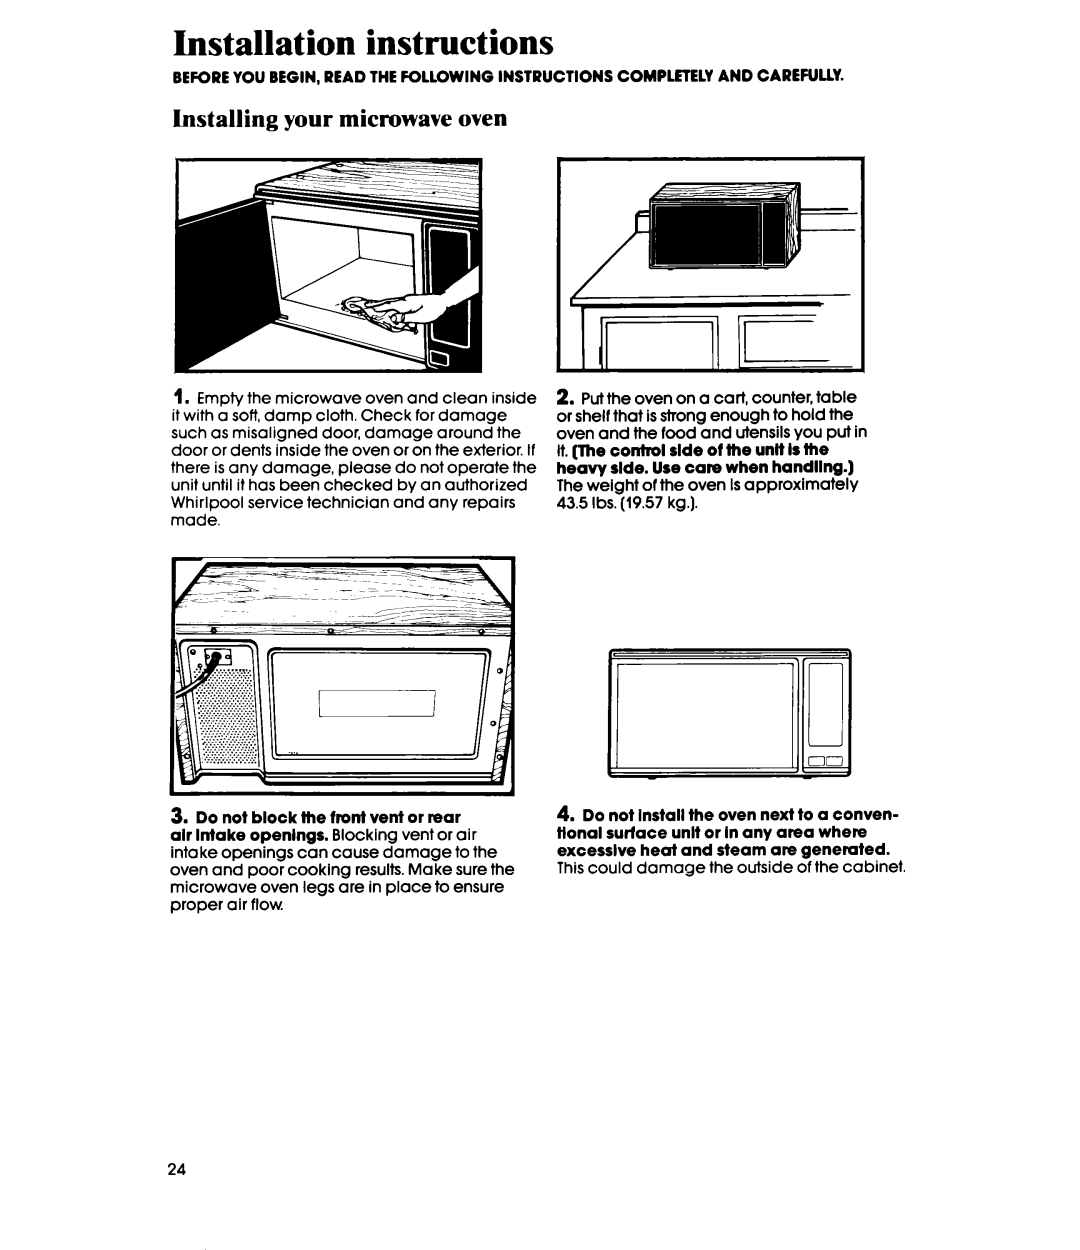 Whirlpool MW36OOXS manual Installation instructions, Installing your microwave oven 